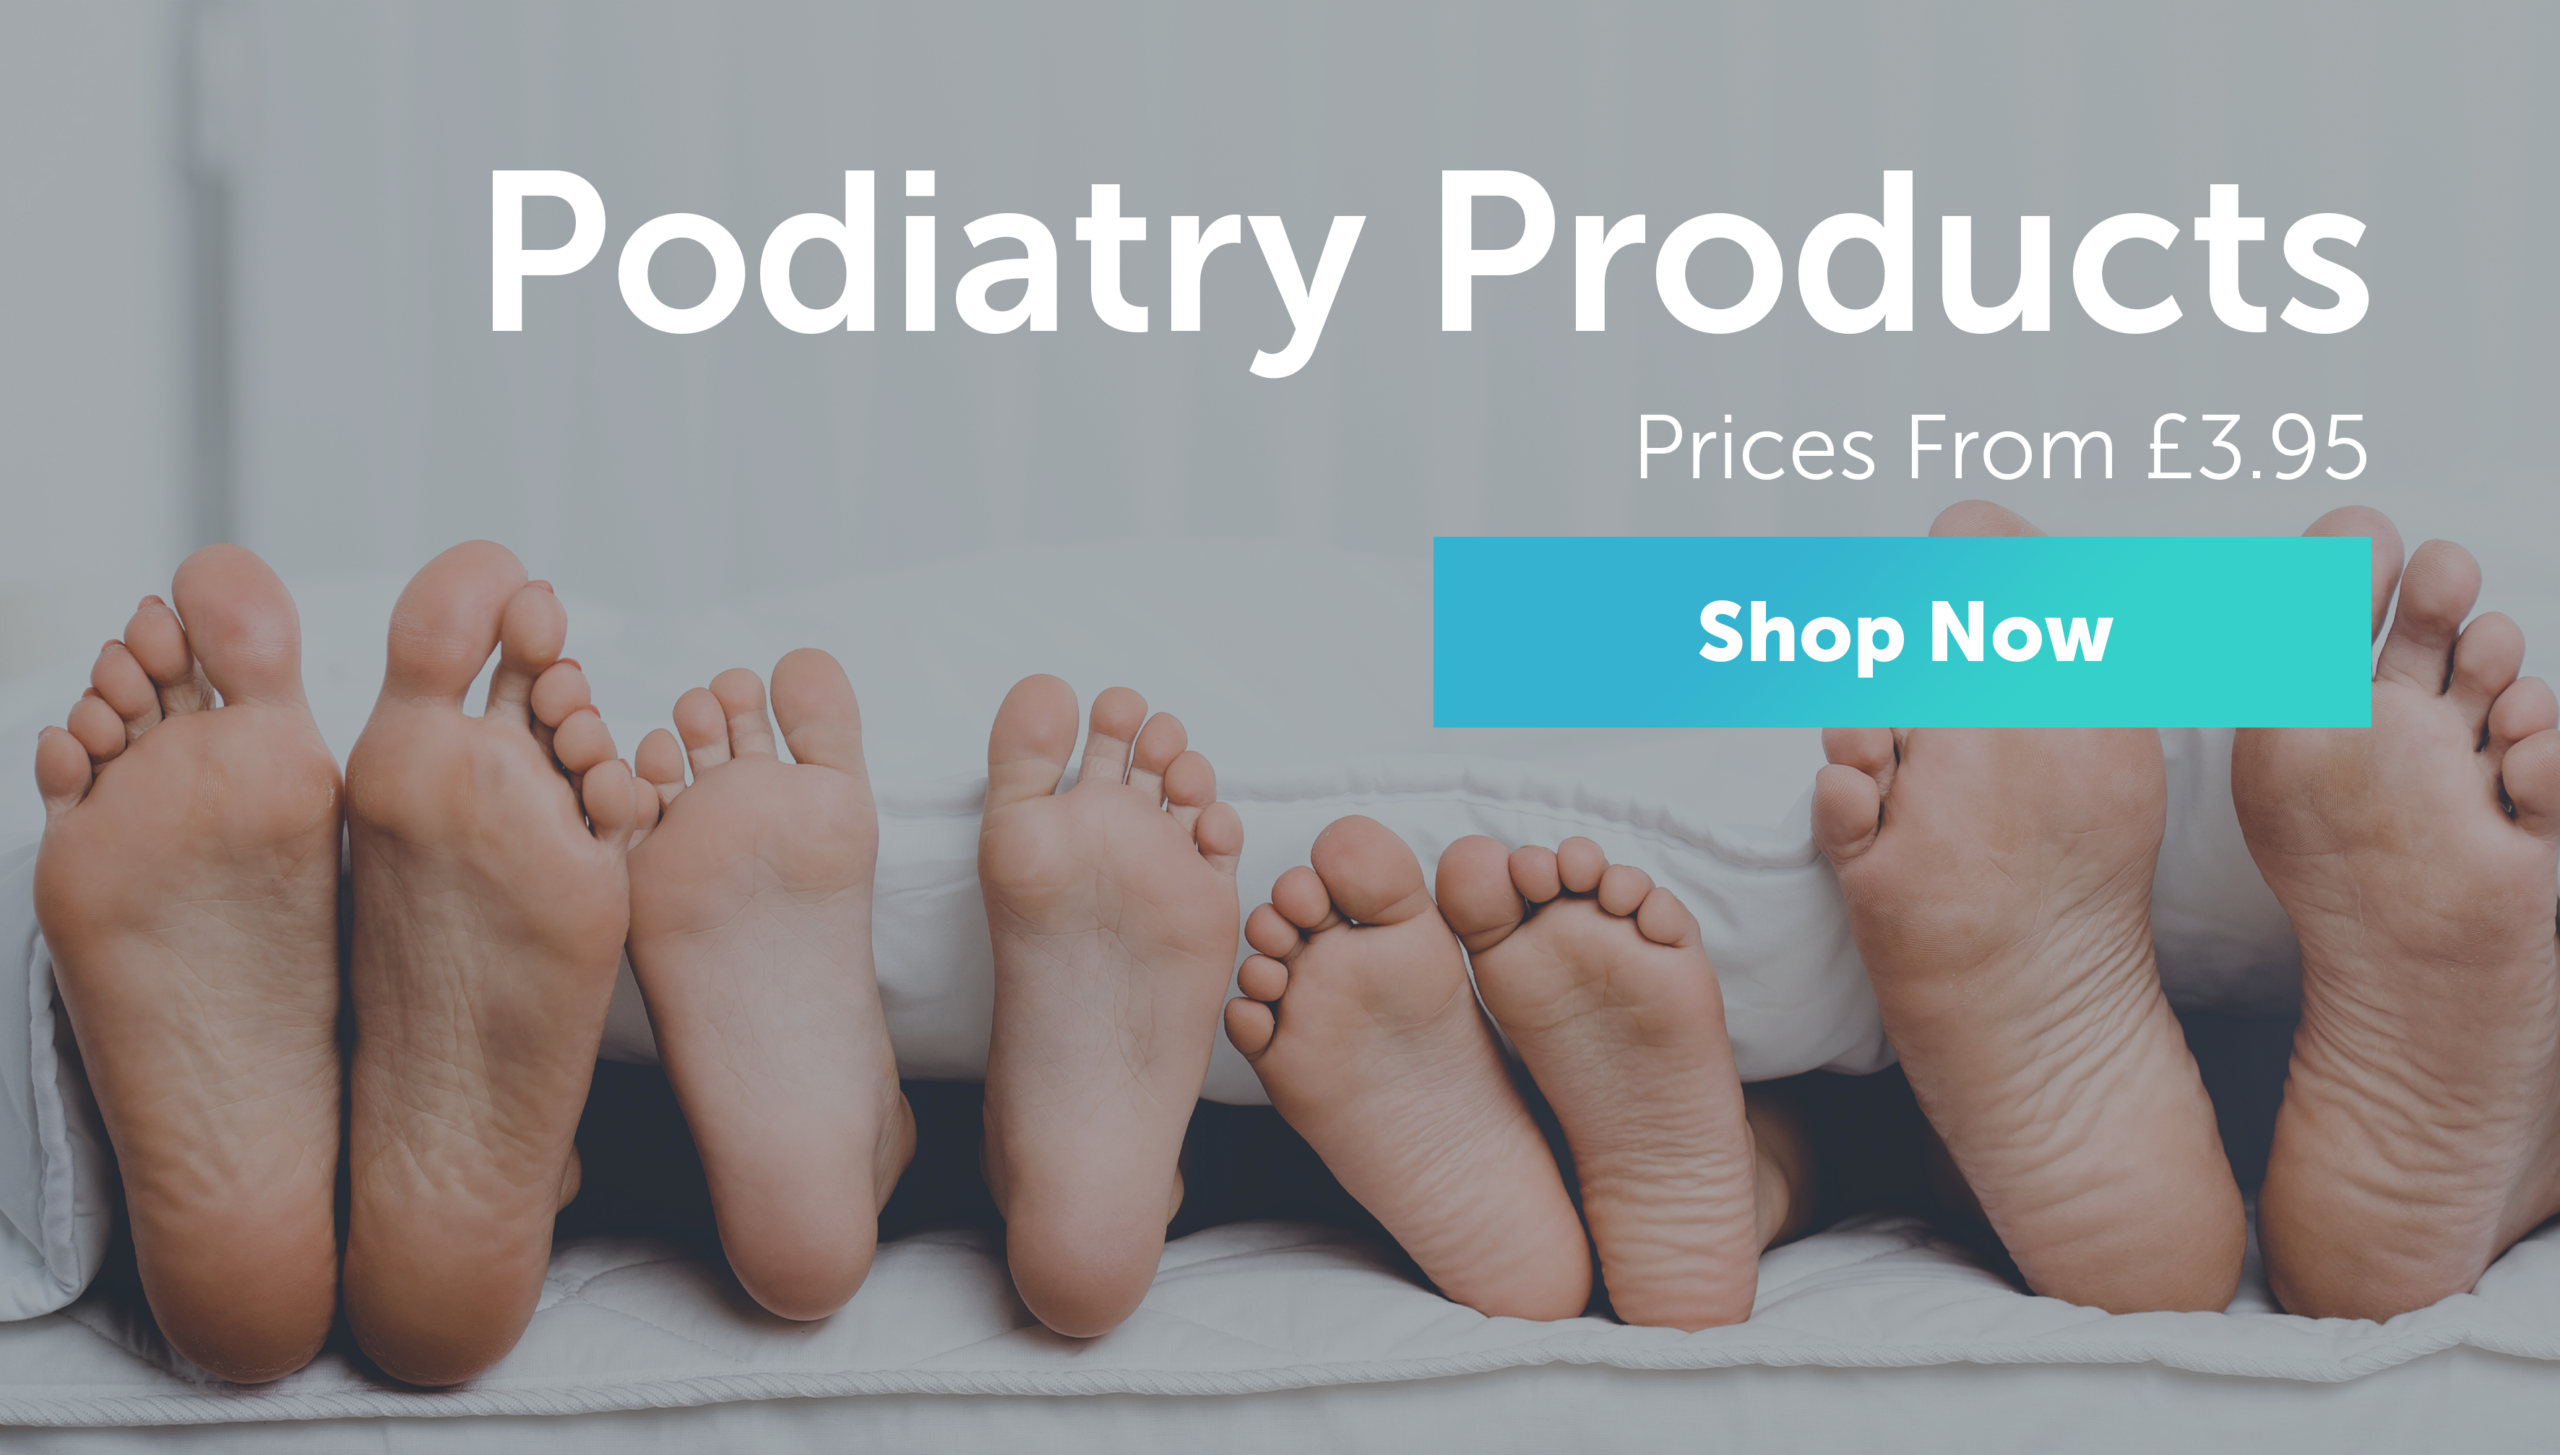 Podiatry Products From £3.95